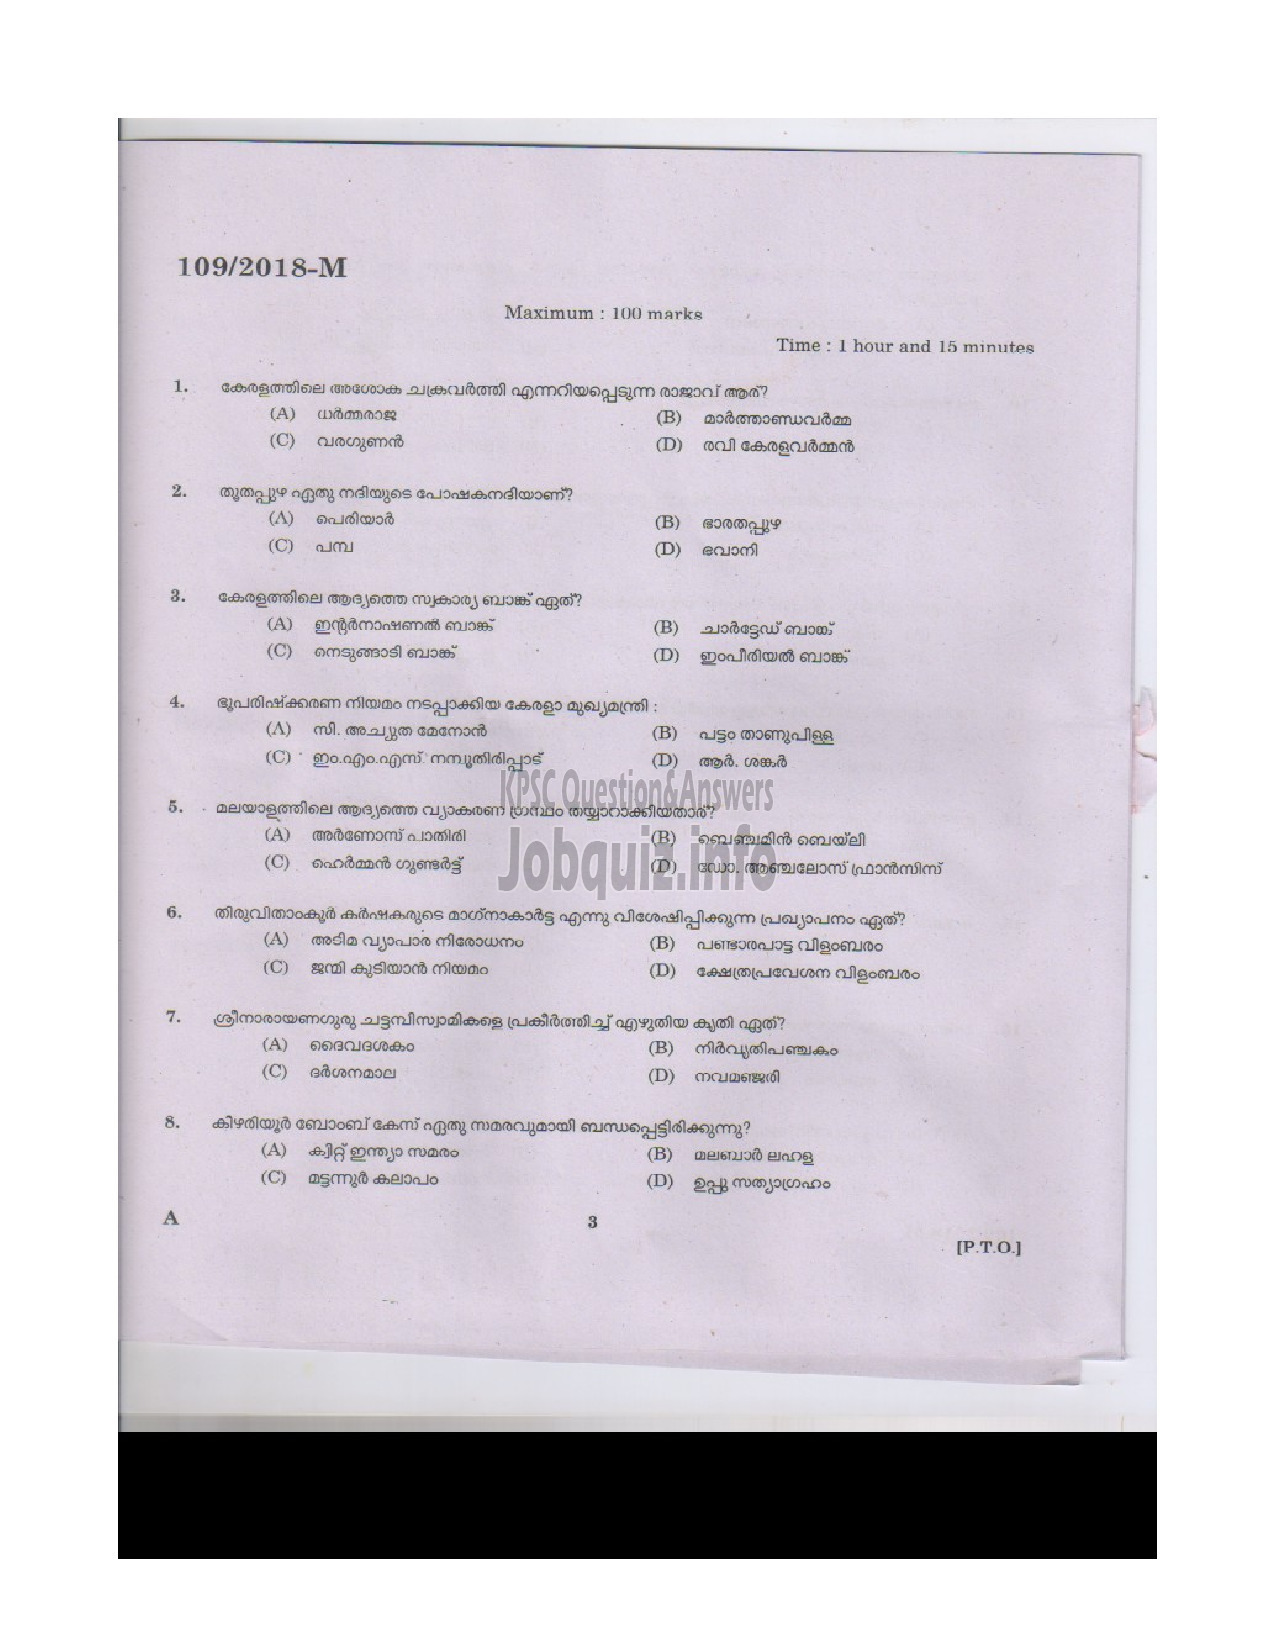 Kerala PSC Question Paper - ATTENDER GR II LIGHT KEEPER SIGNALLER CLERICAL ATTENDER FEMALE ASSISTANT PRISON OFFICER LAB ATTENDER HOMOEOPATHY Malayalam/English -2